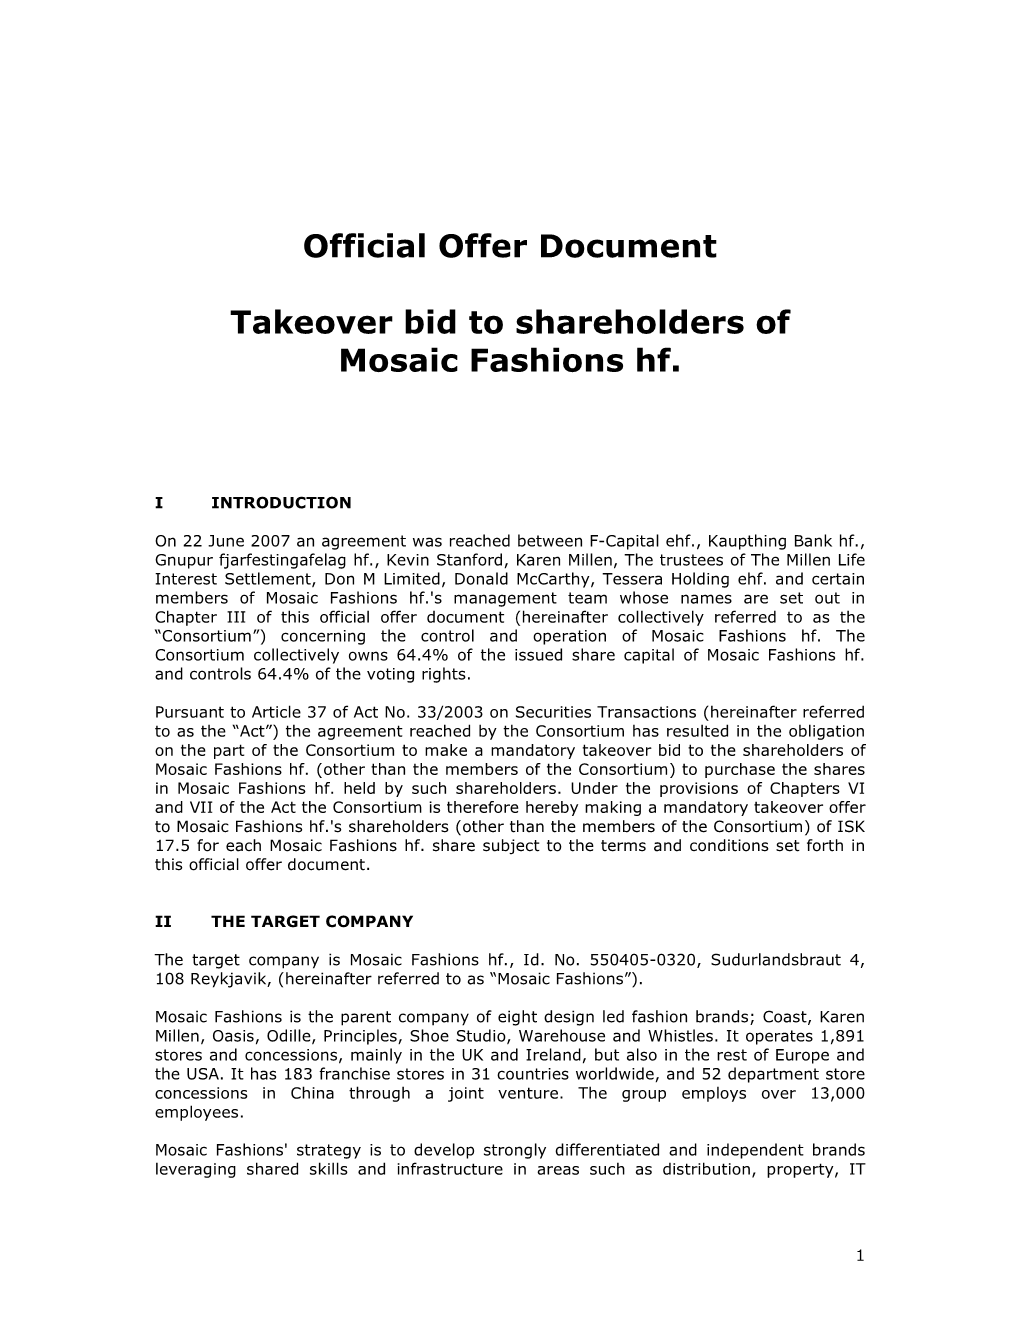 Official Offer Document Takeover Bid to Shareholders of Mosaic Fashions